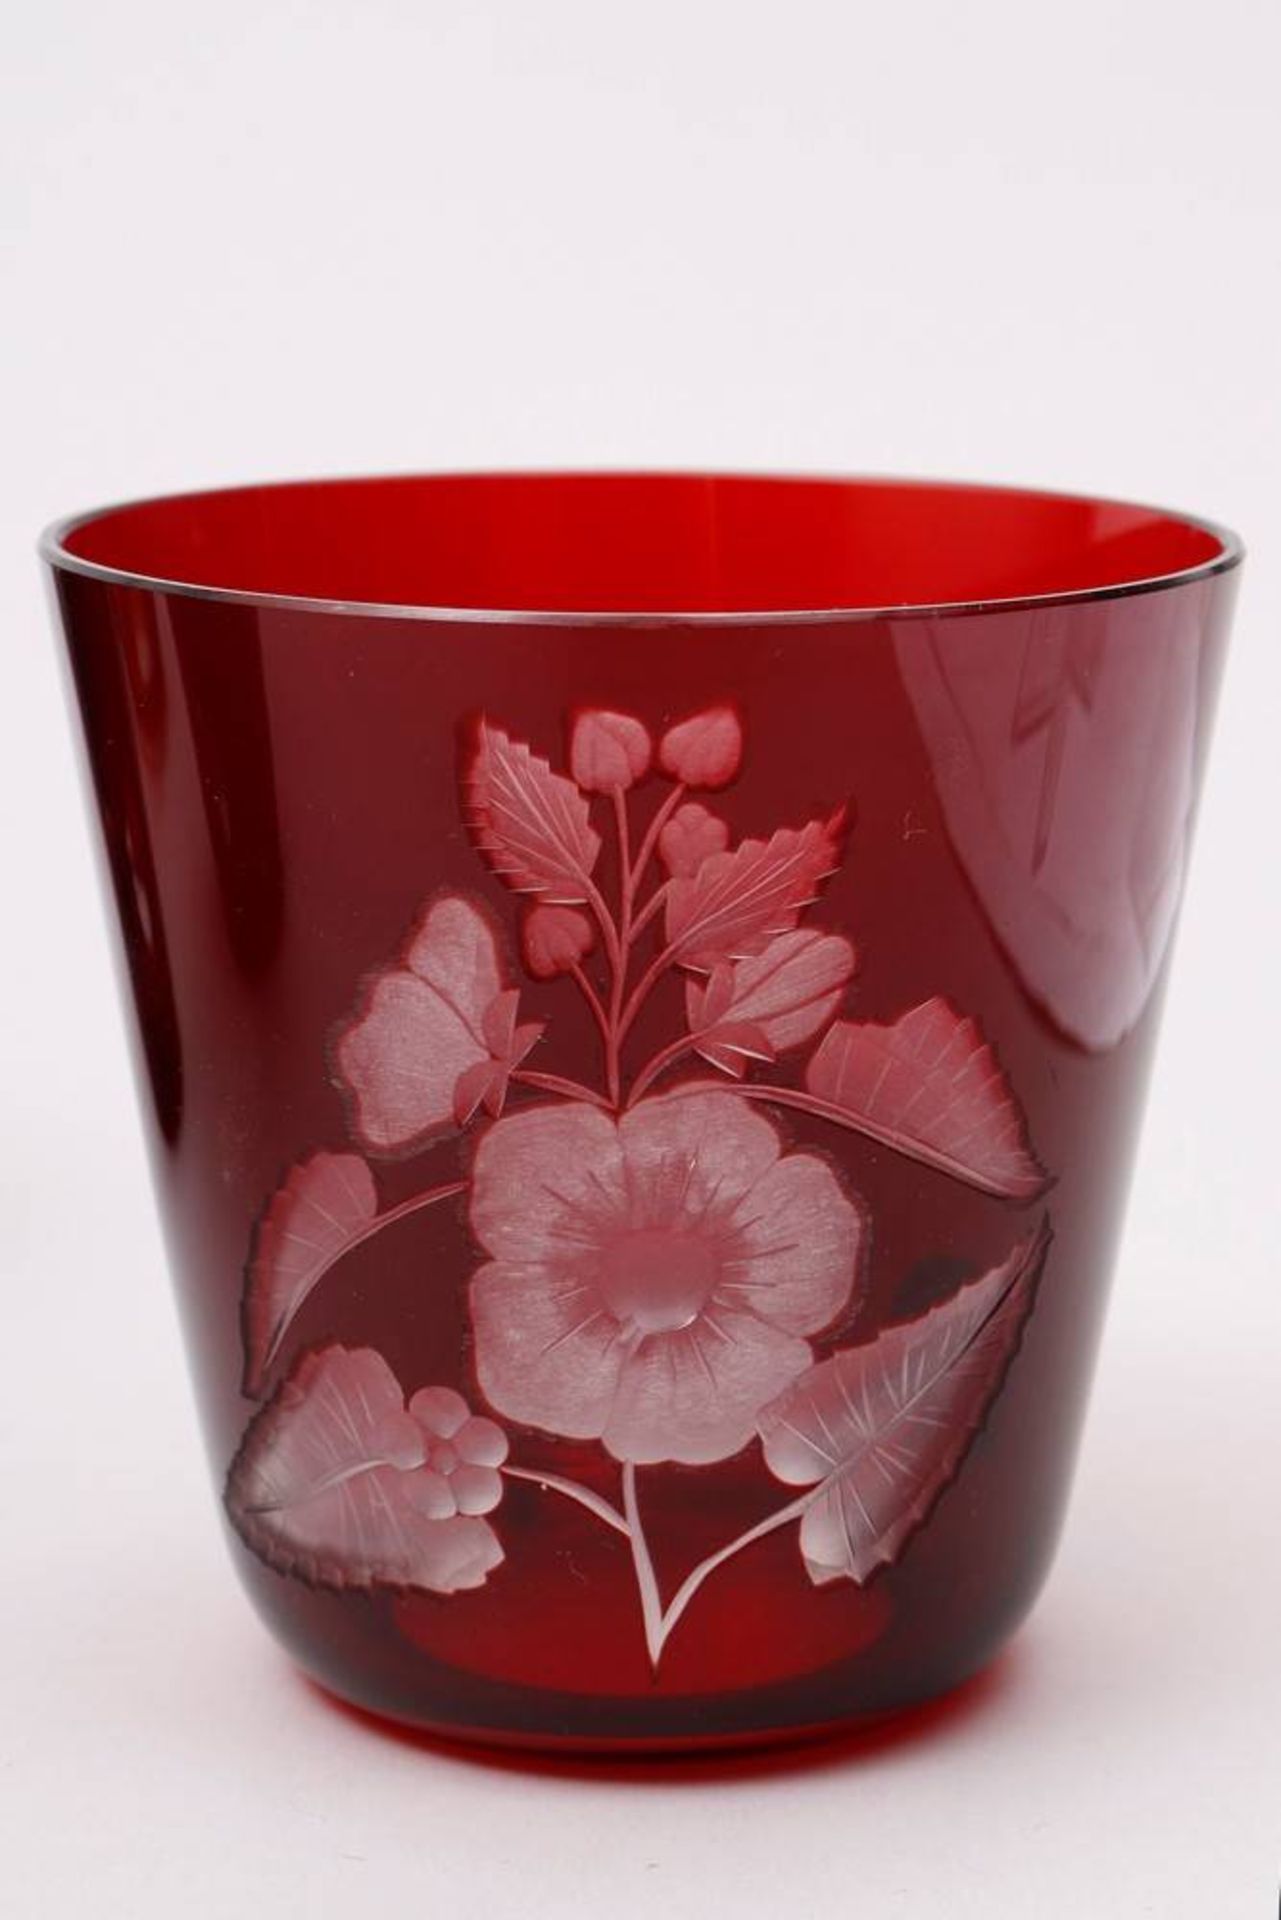 6 Tumbler Rotter, Lübeck, 4x dot-decoration and 2x floral decoration, glass, cased in red, blue - Bild 4 aus 4